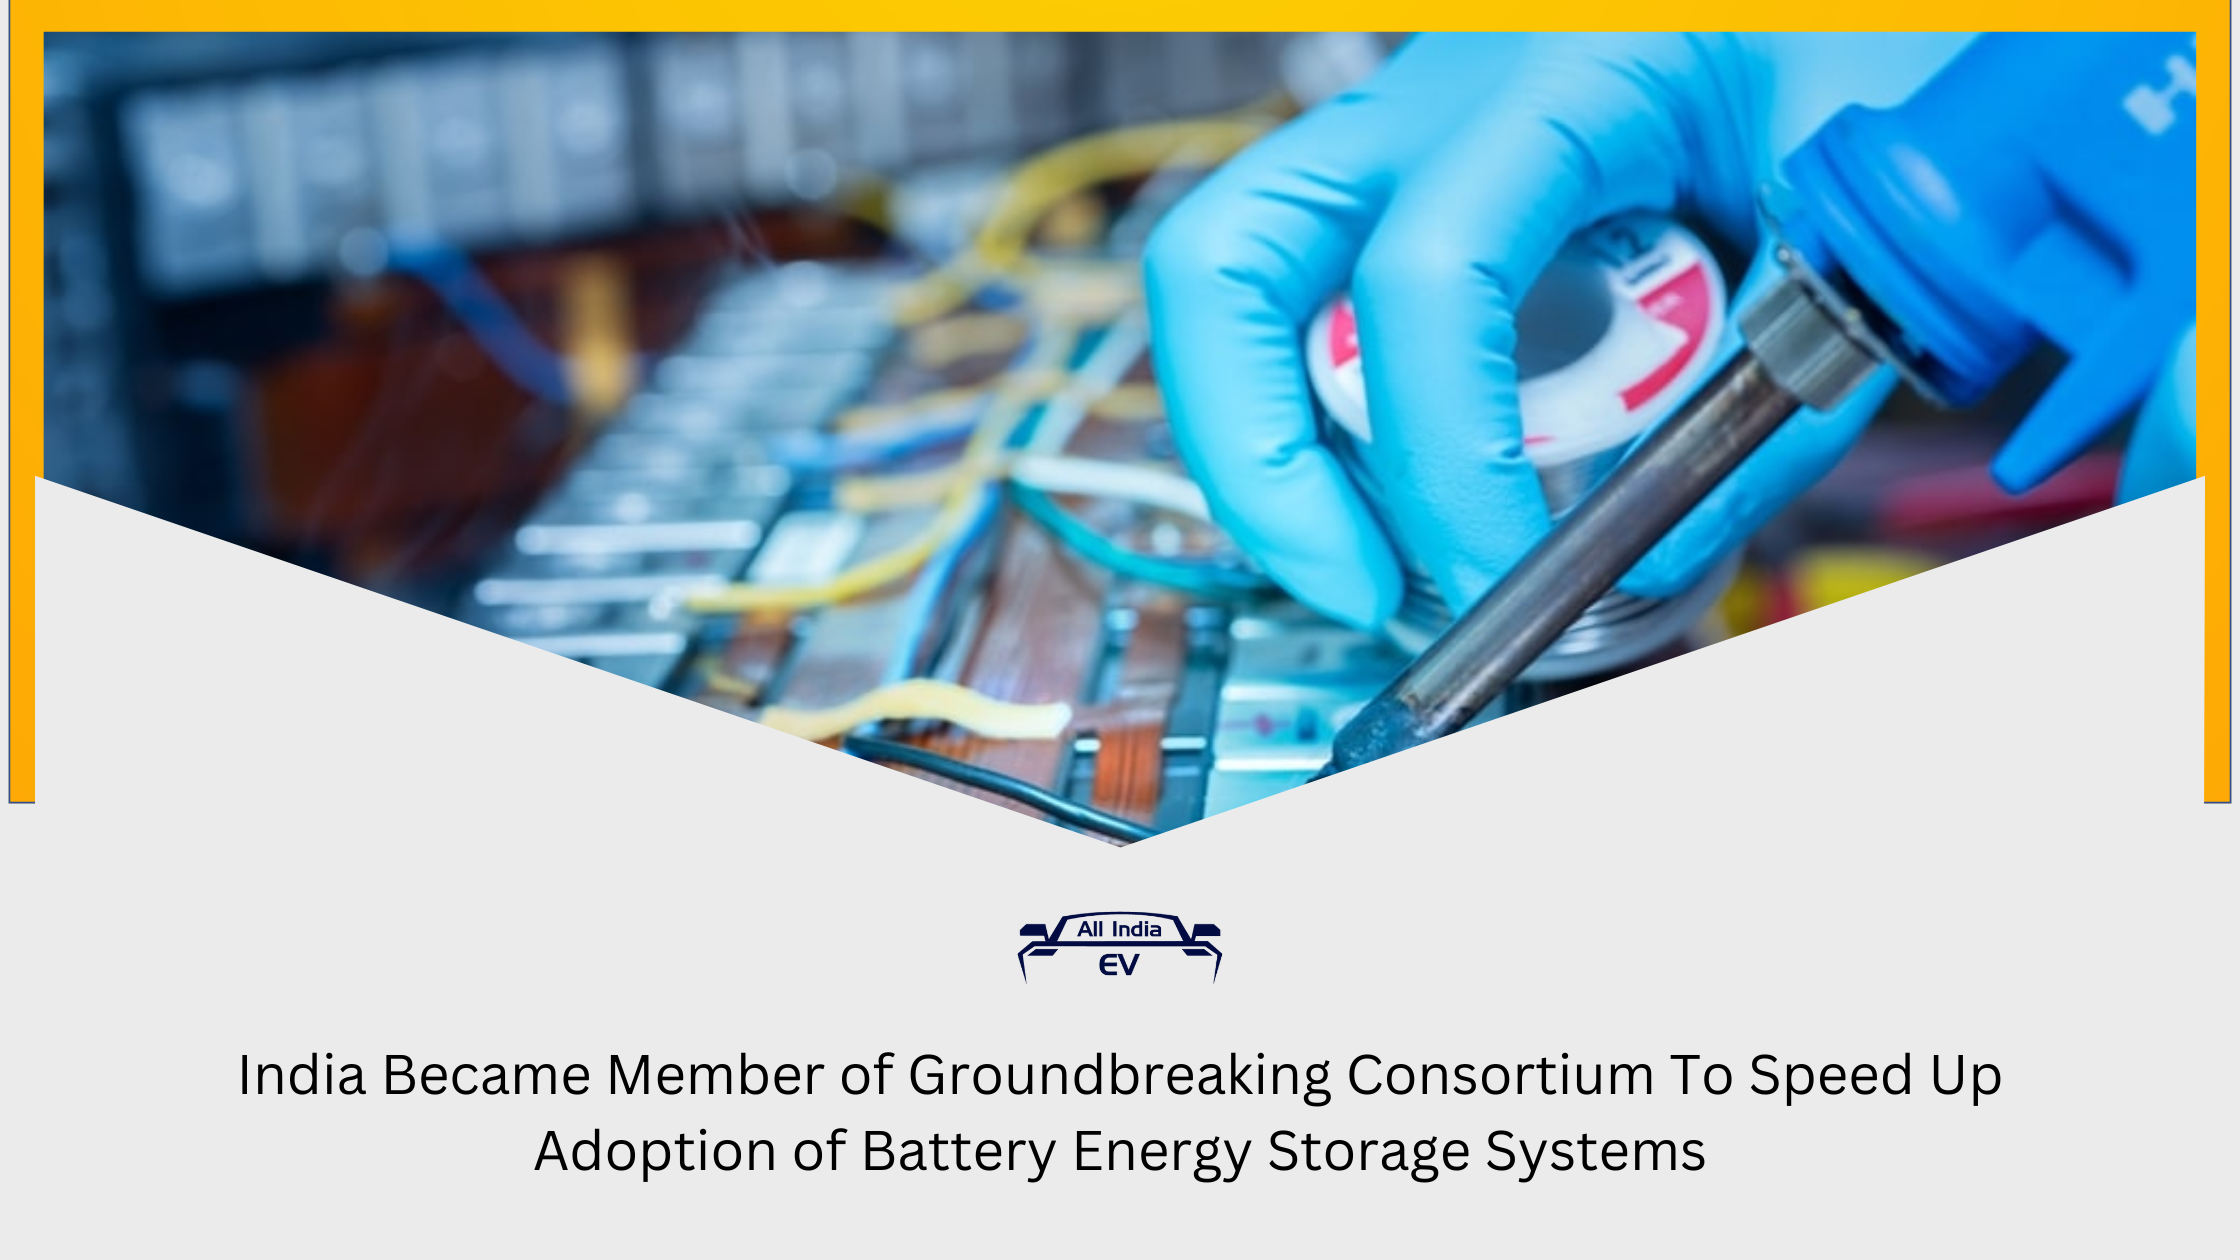 India Became Member of Groundbreaking Consortium To Speed Up Adoption of Battery Energy Storage Systems